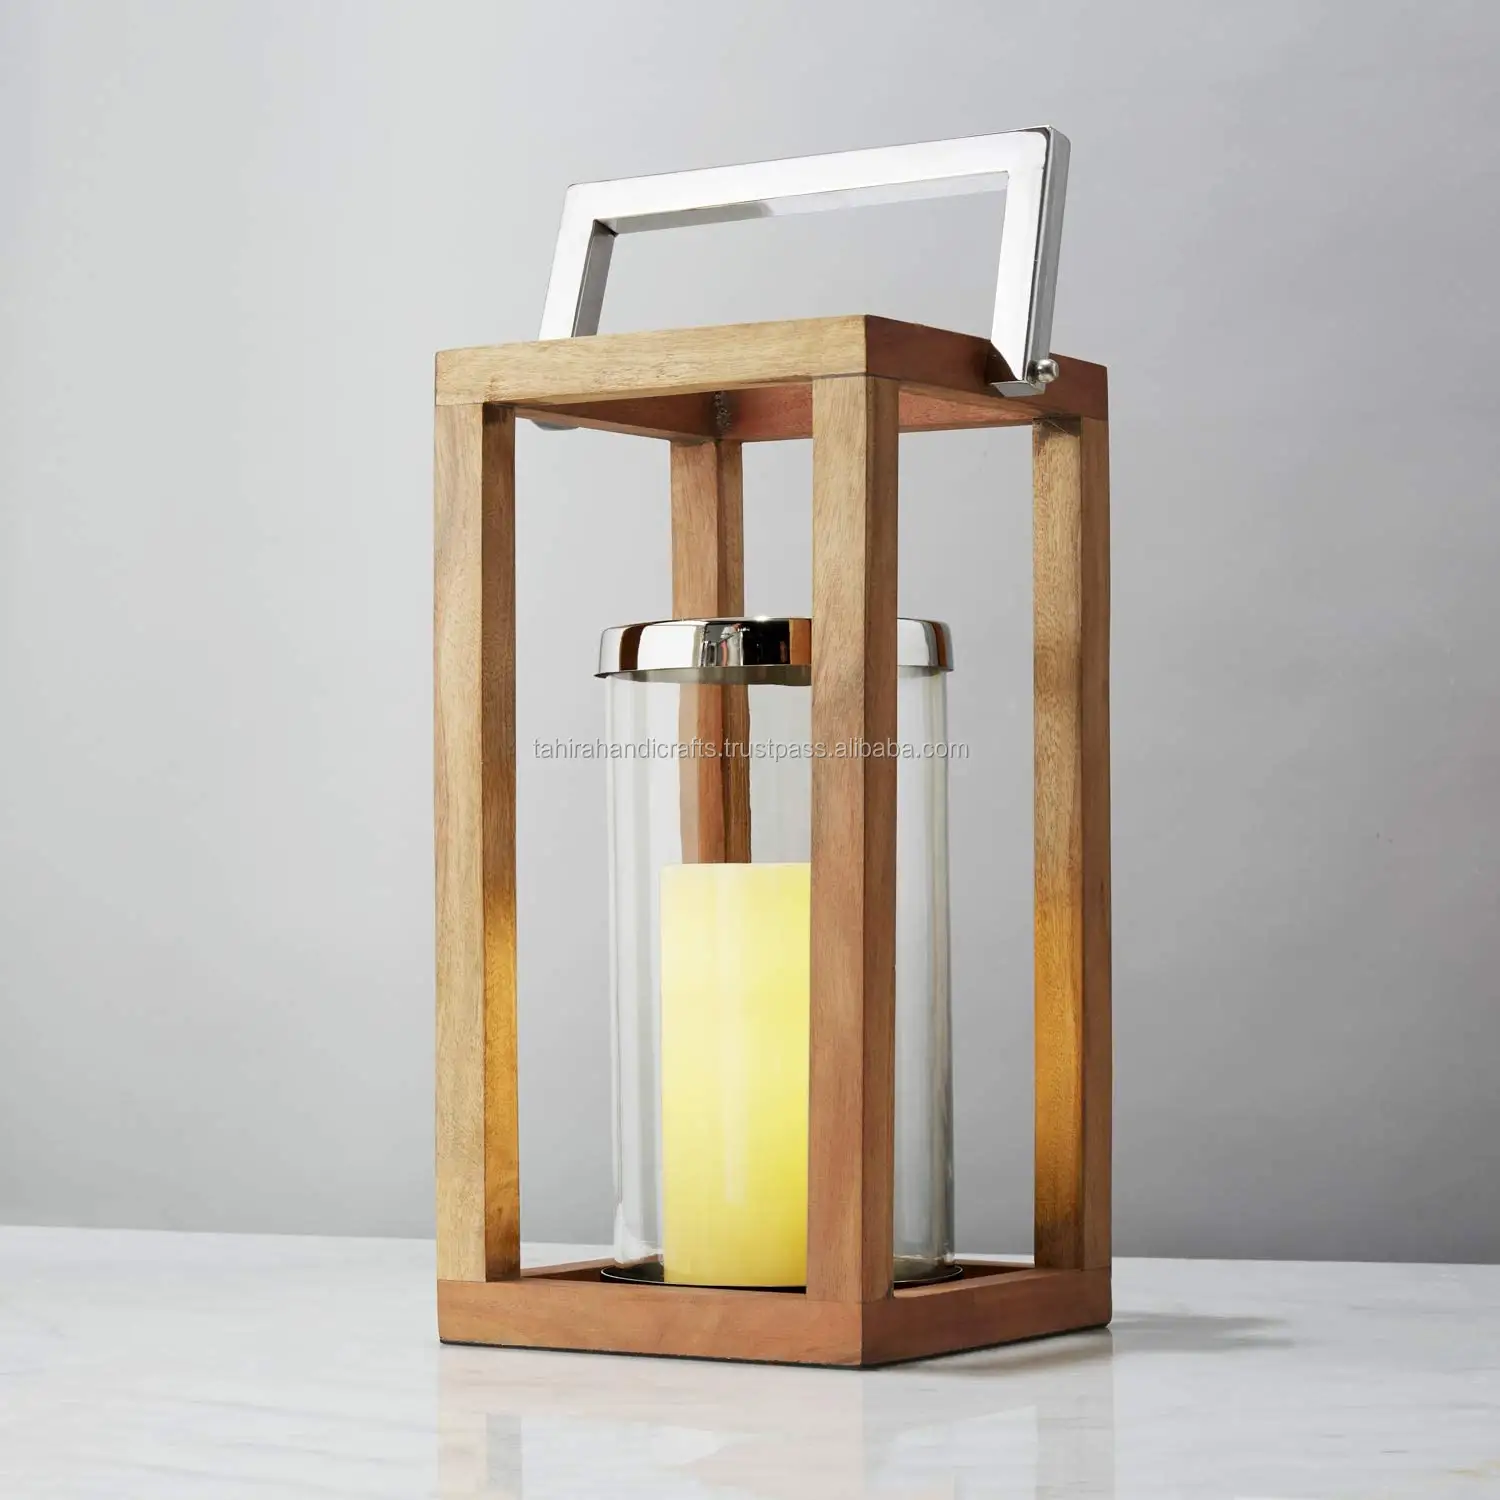 wooden amazon product hurricane lantern with led light Outdoor, indoor decor living room Christmas easter Gift